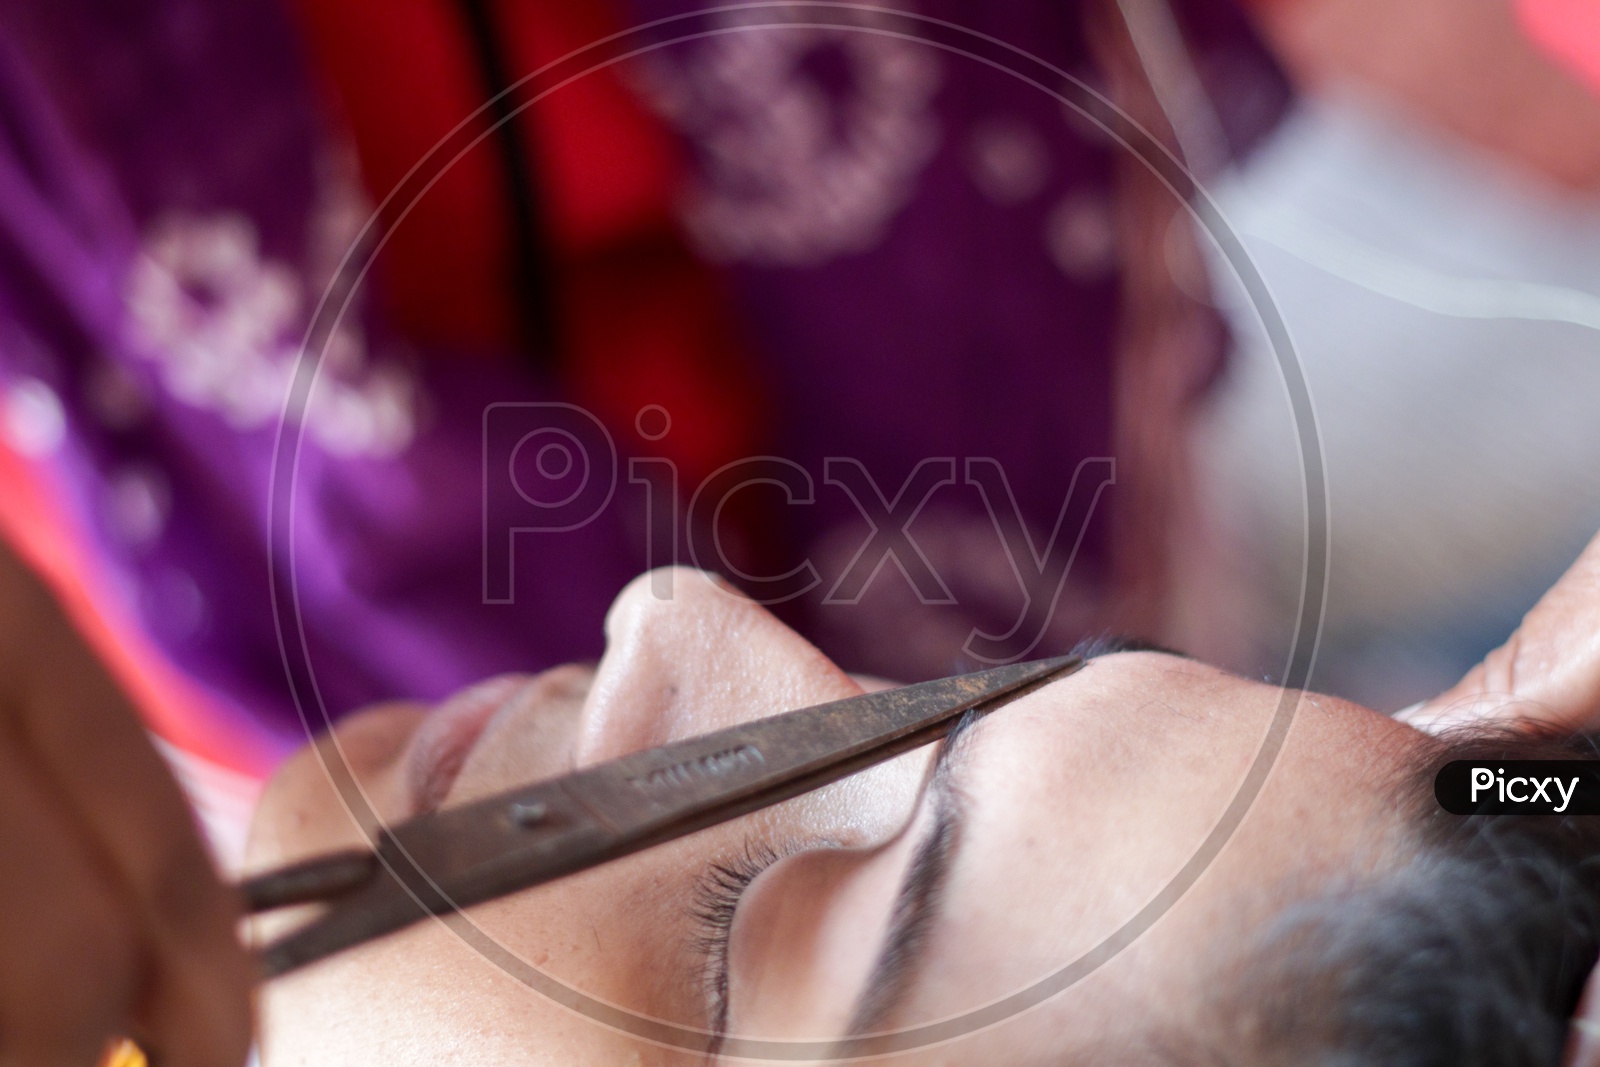 shaping and plucking of eye brow with threading. epilation cosmetic procedure in beauty parlour.